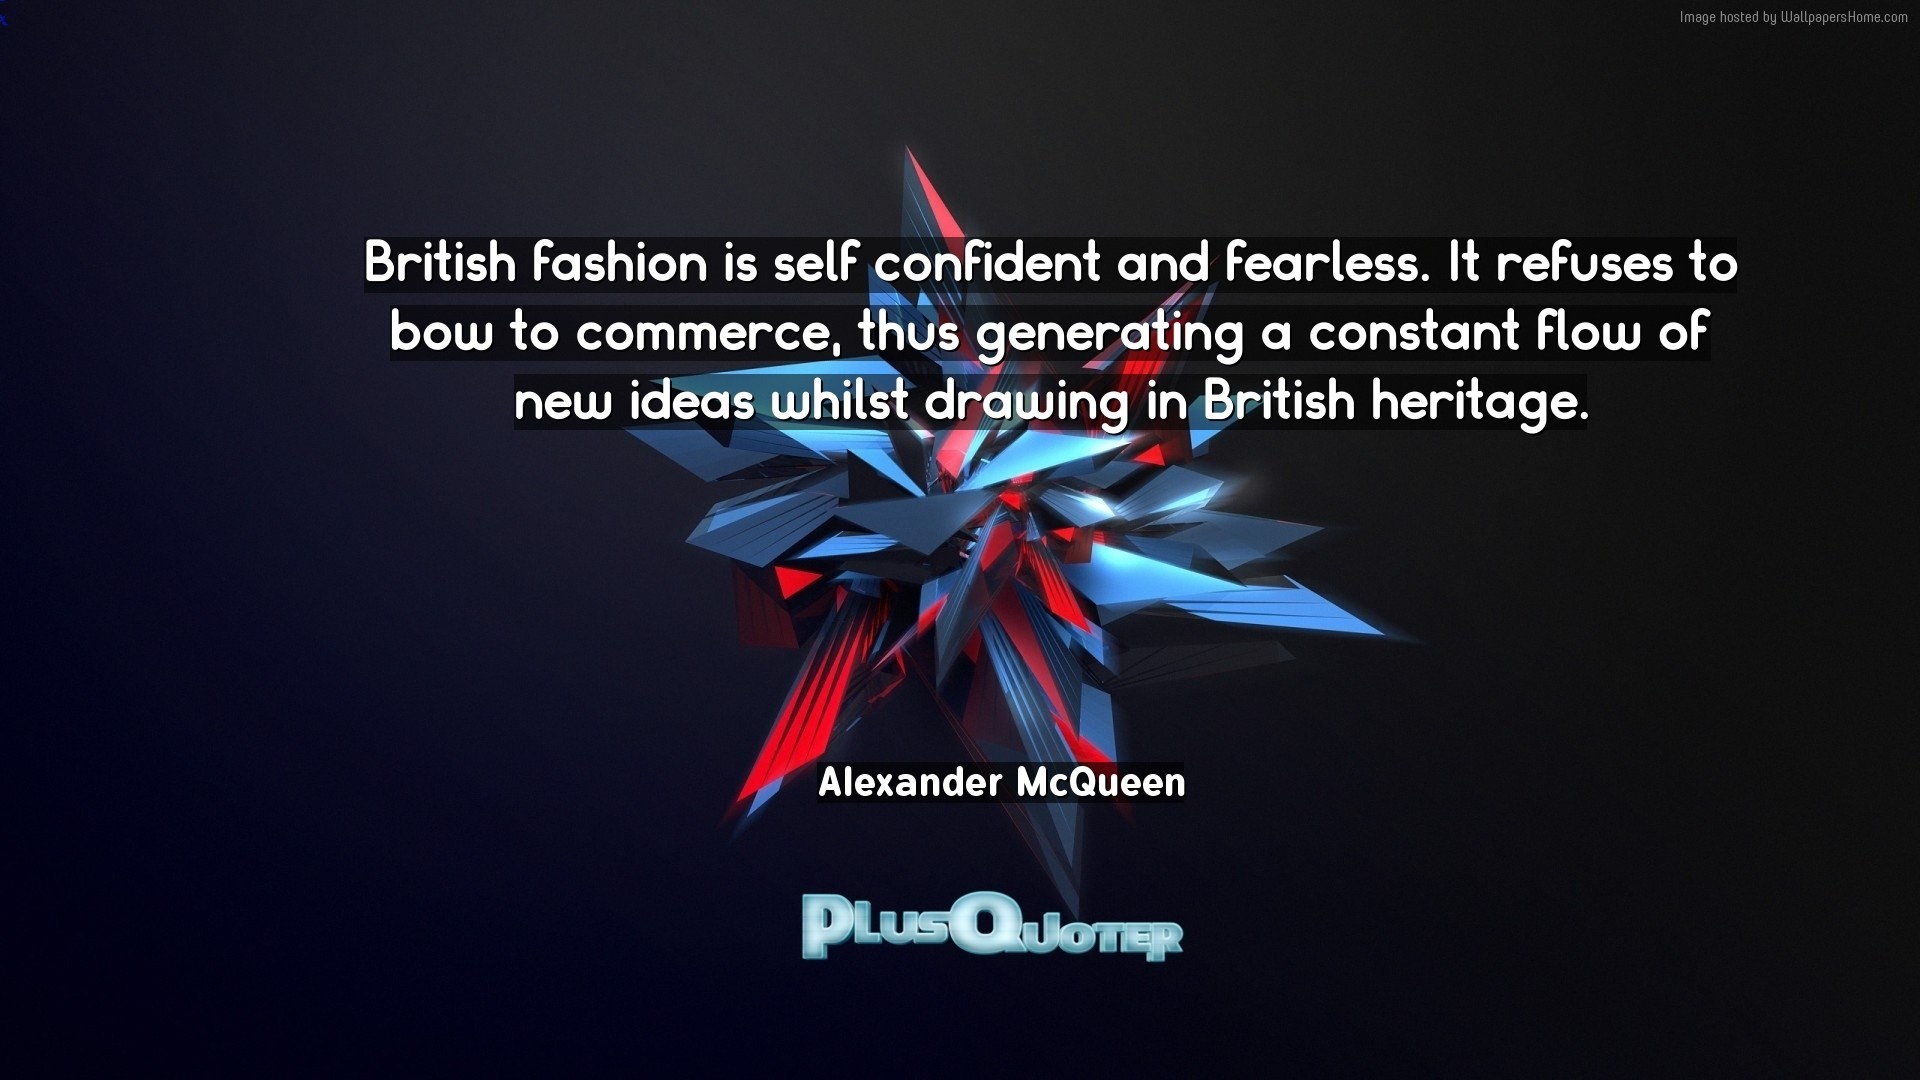 1920x1080 Download Wallpaper with inspirational Quotes- "British fashion is self  confident and fearless. It